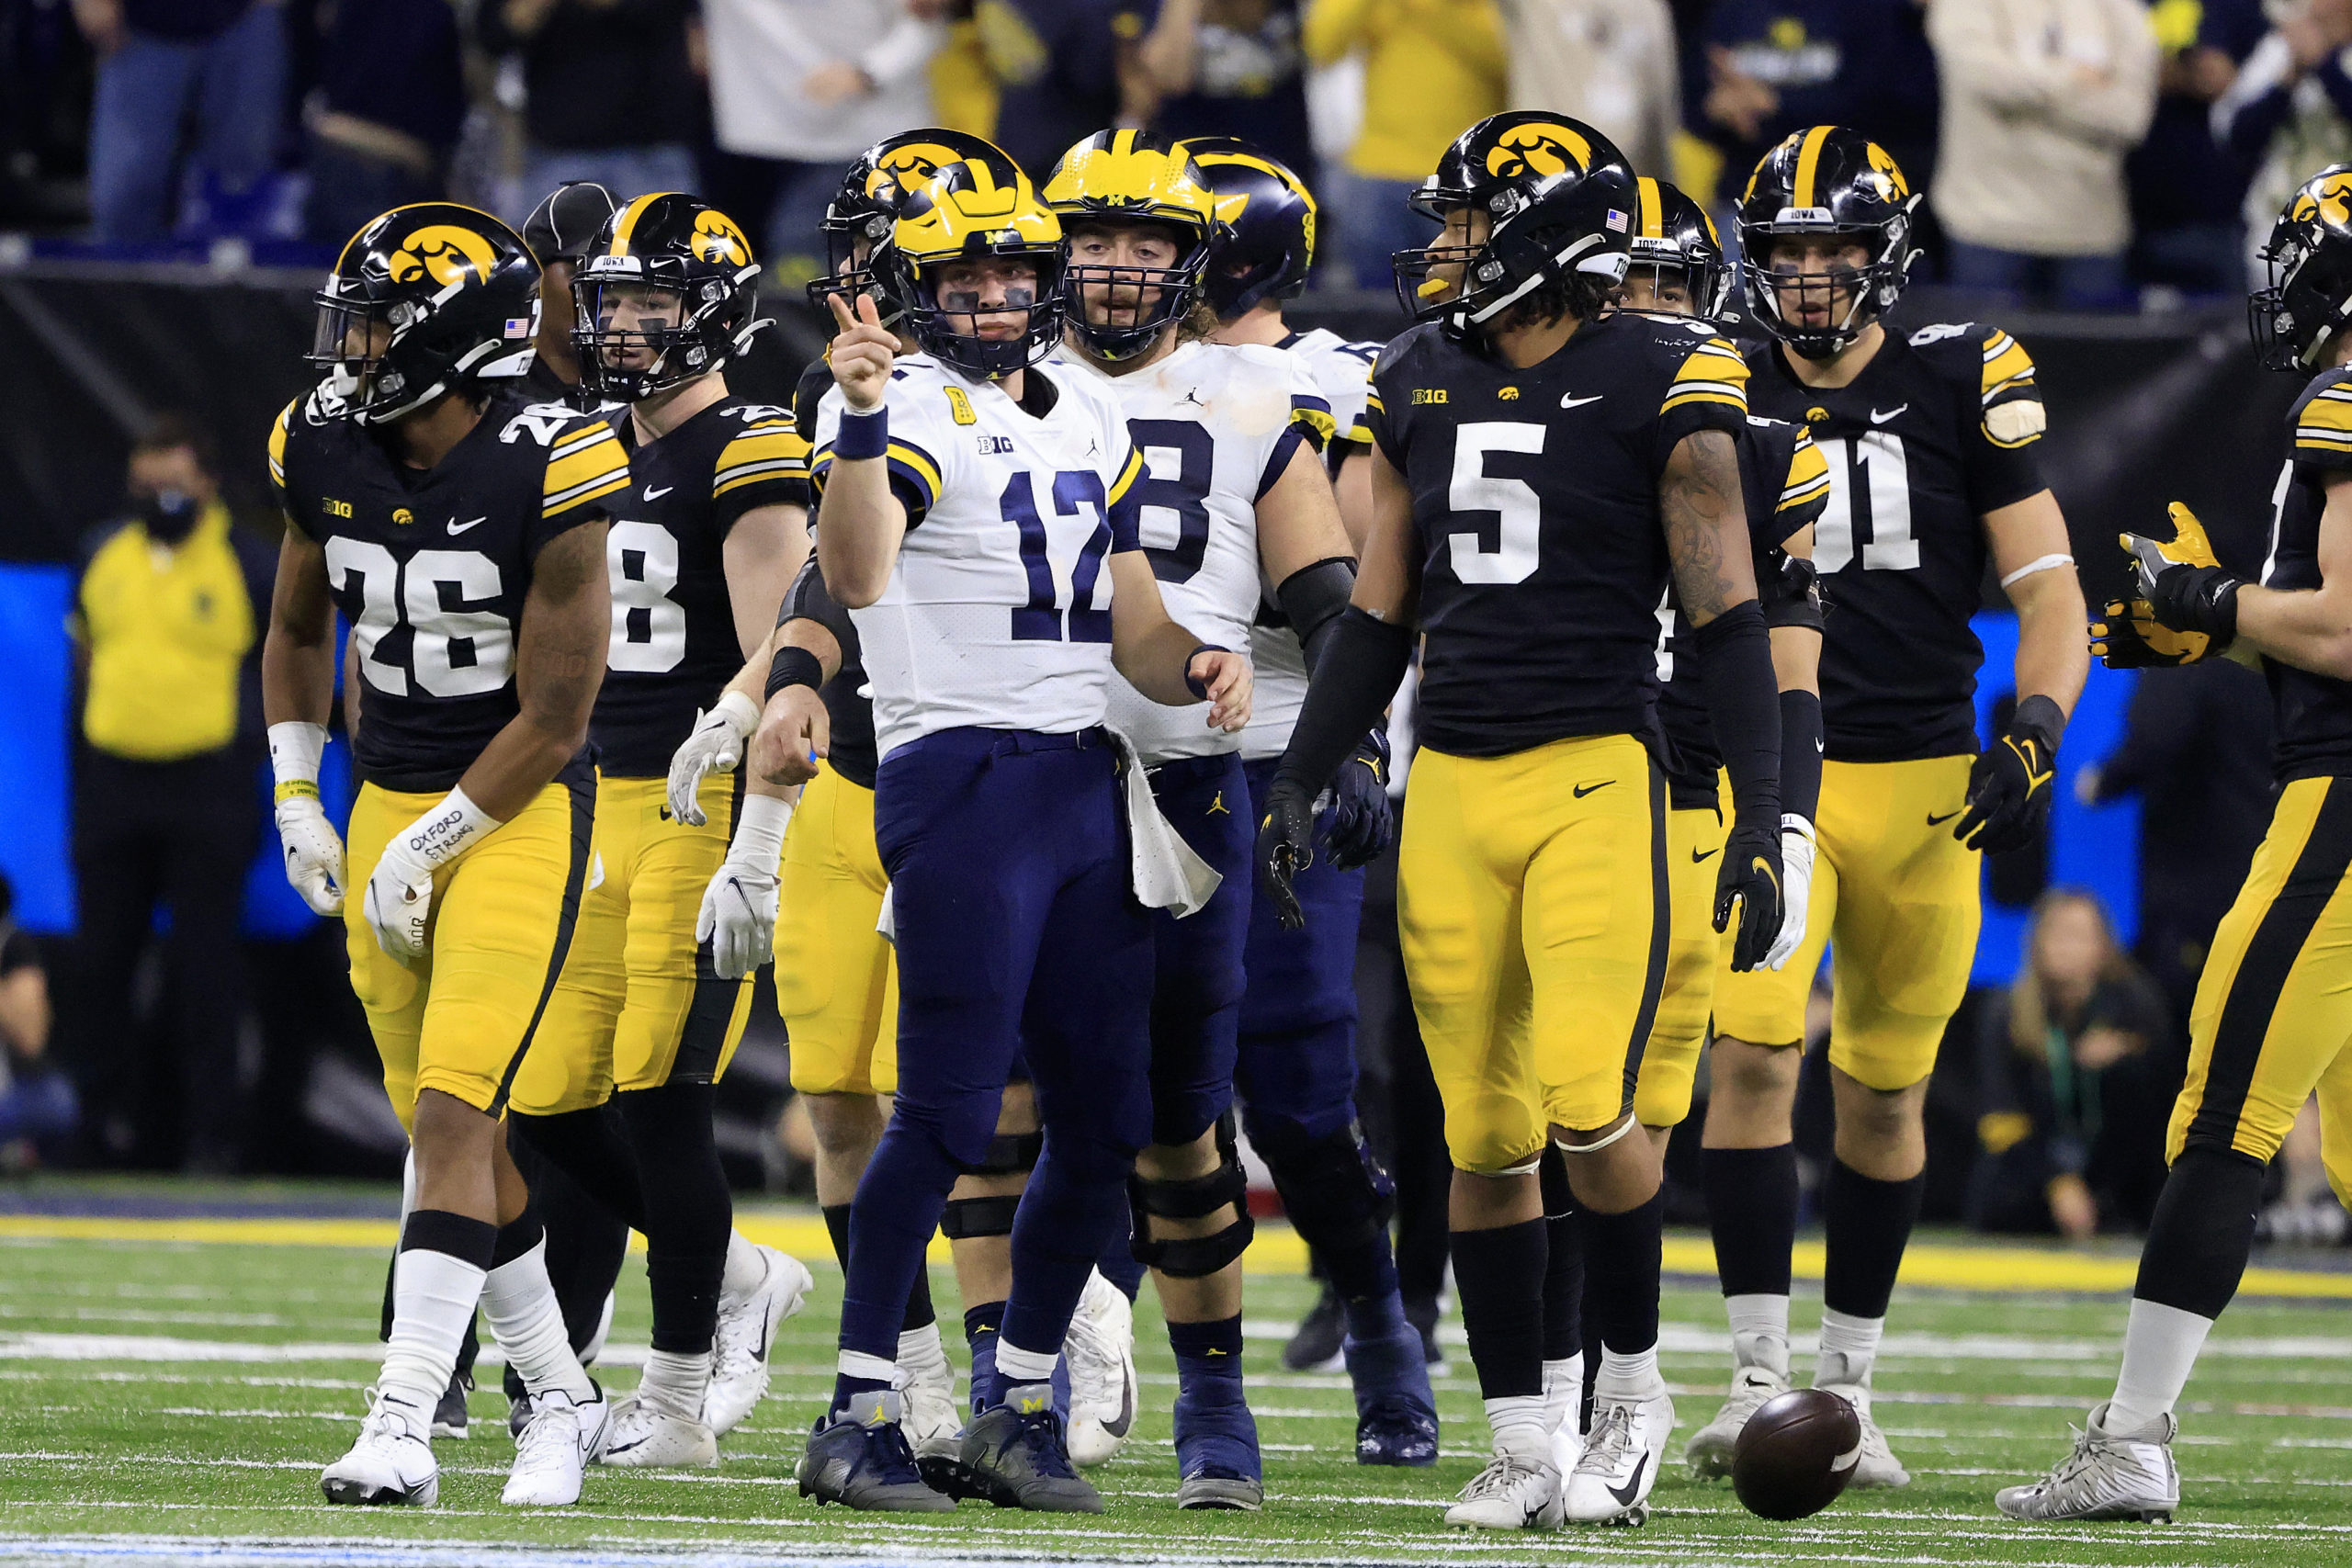 INDIANAPOLIS, INDIANA - DECEMBER 04: Cade McNamara #12 of the Michigan Wolverines reacts after a first down during the Big Ten Football Championship against the Iowa Hawkeyes at Lucas Oil Stadium on December 04, 2021 in Indianapolis, Indiana. (Photo by Justin Casterline/Getty Images)